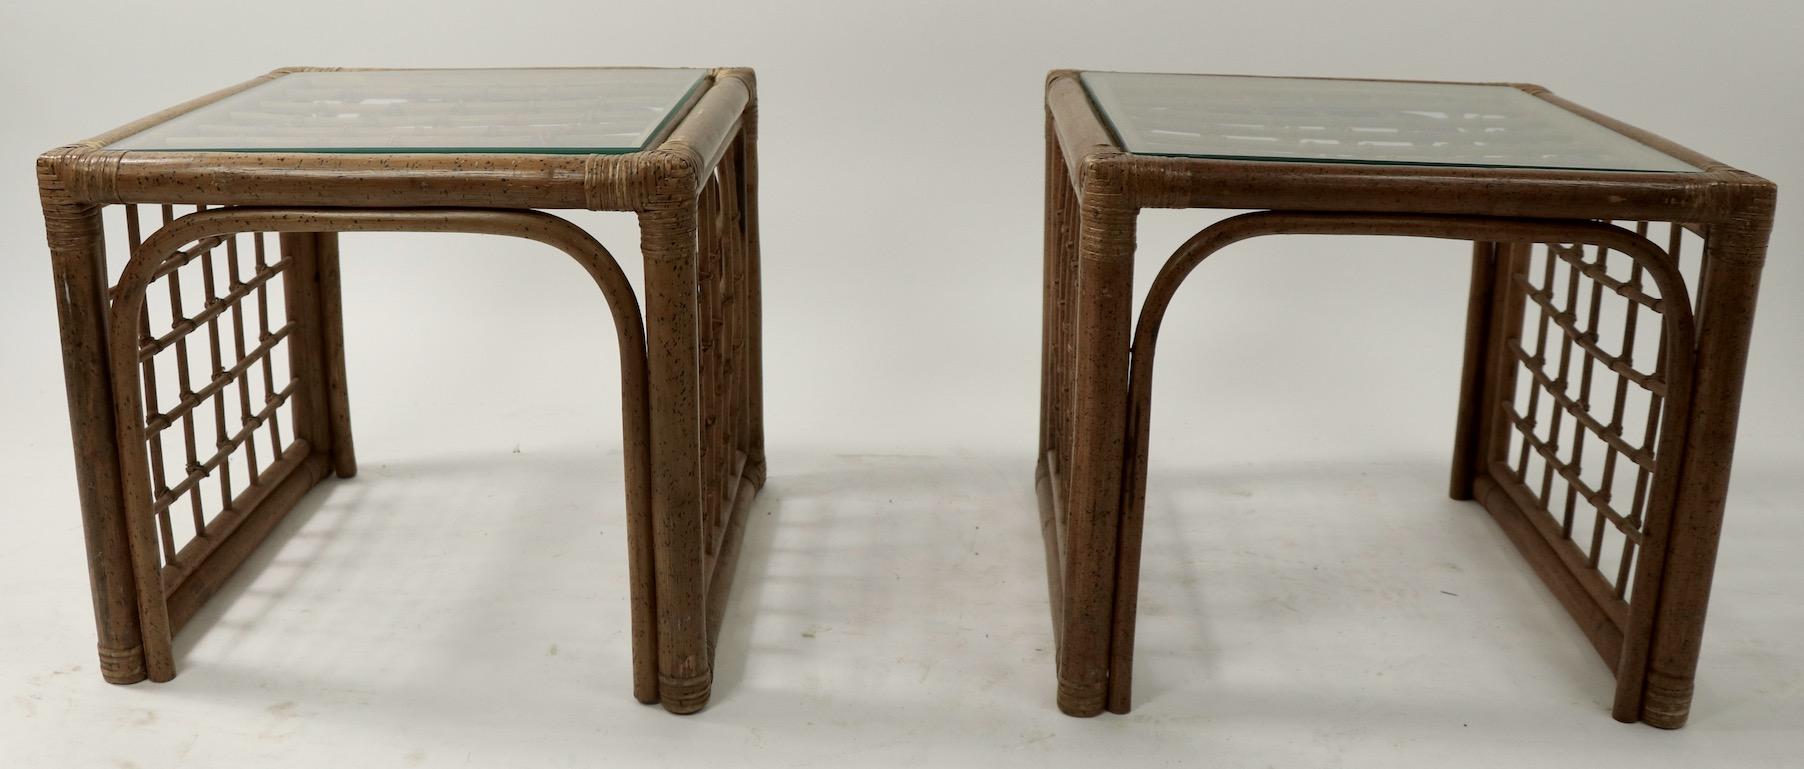 Pair of Bamboo and Glass Tables For Sale 3